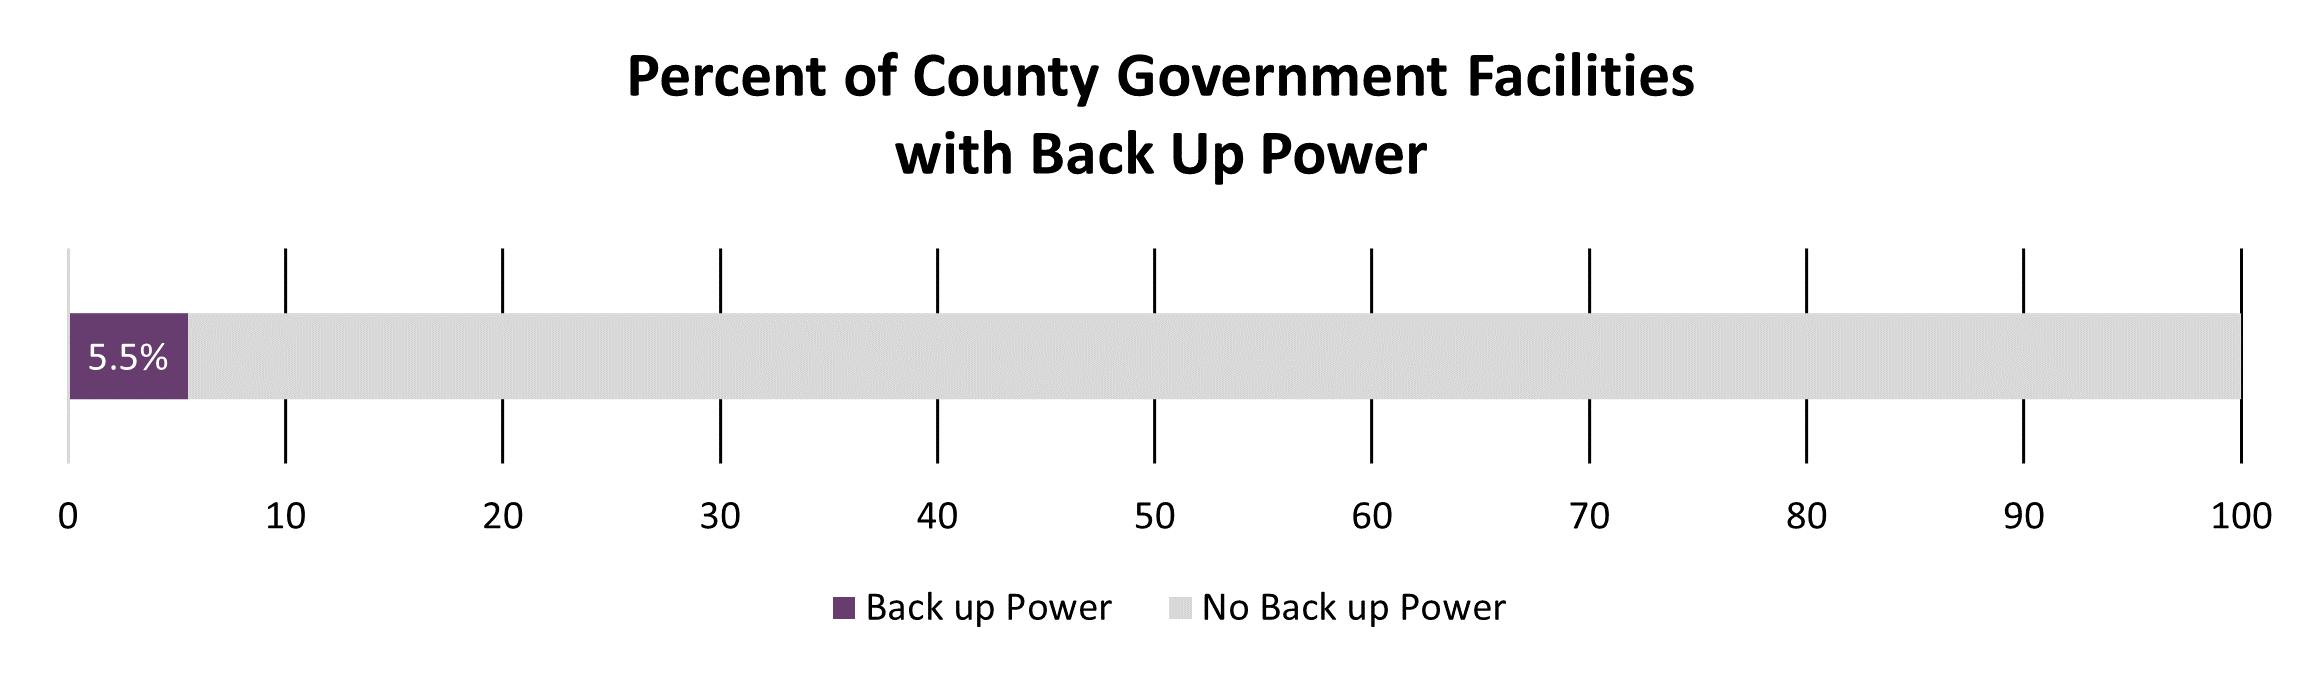 percent % of county gov facilities with back up power